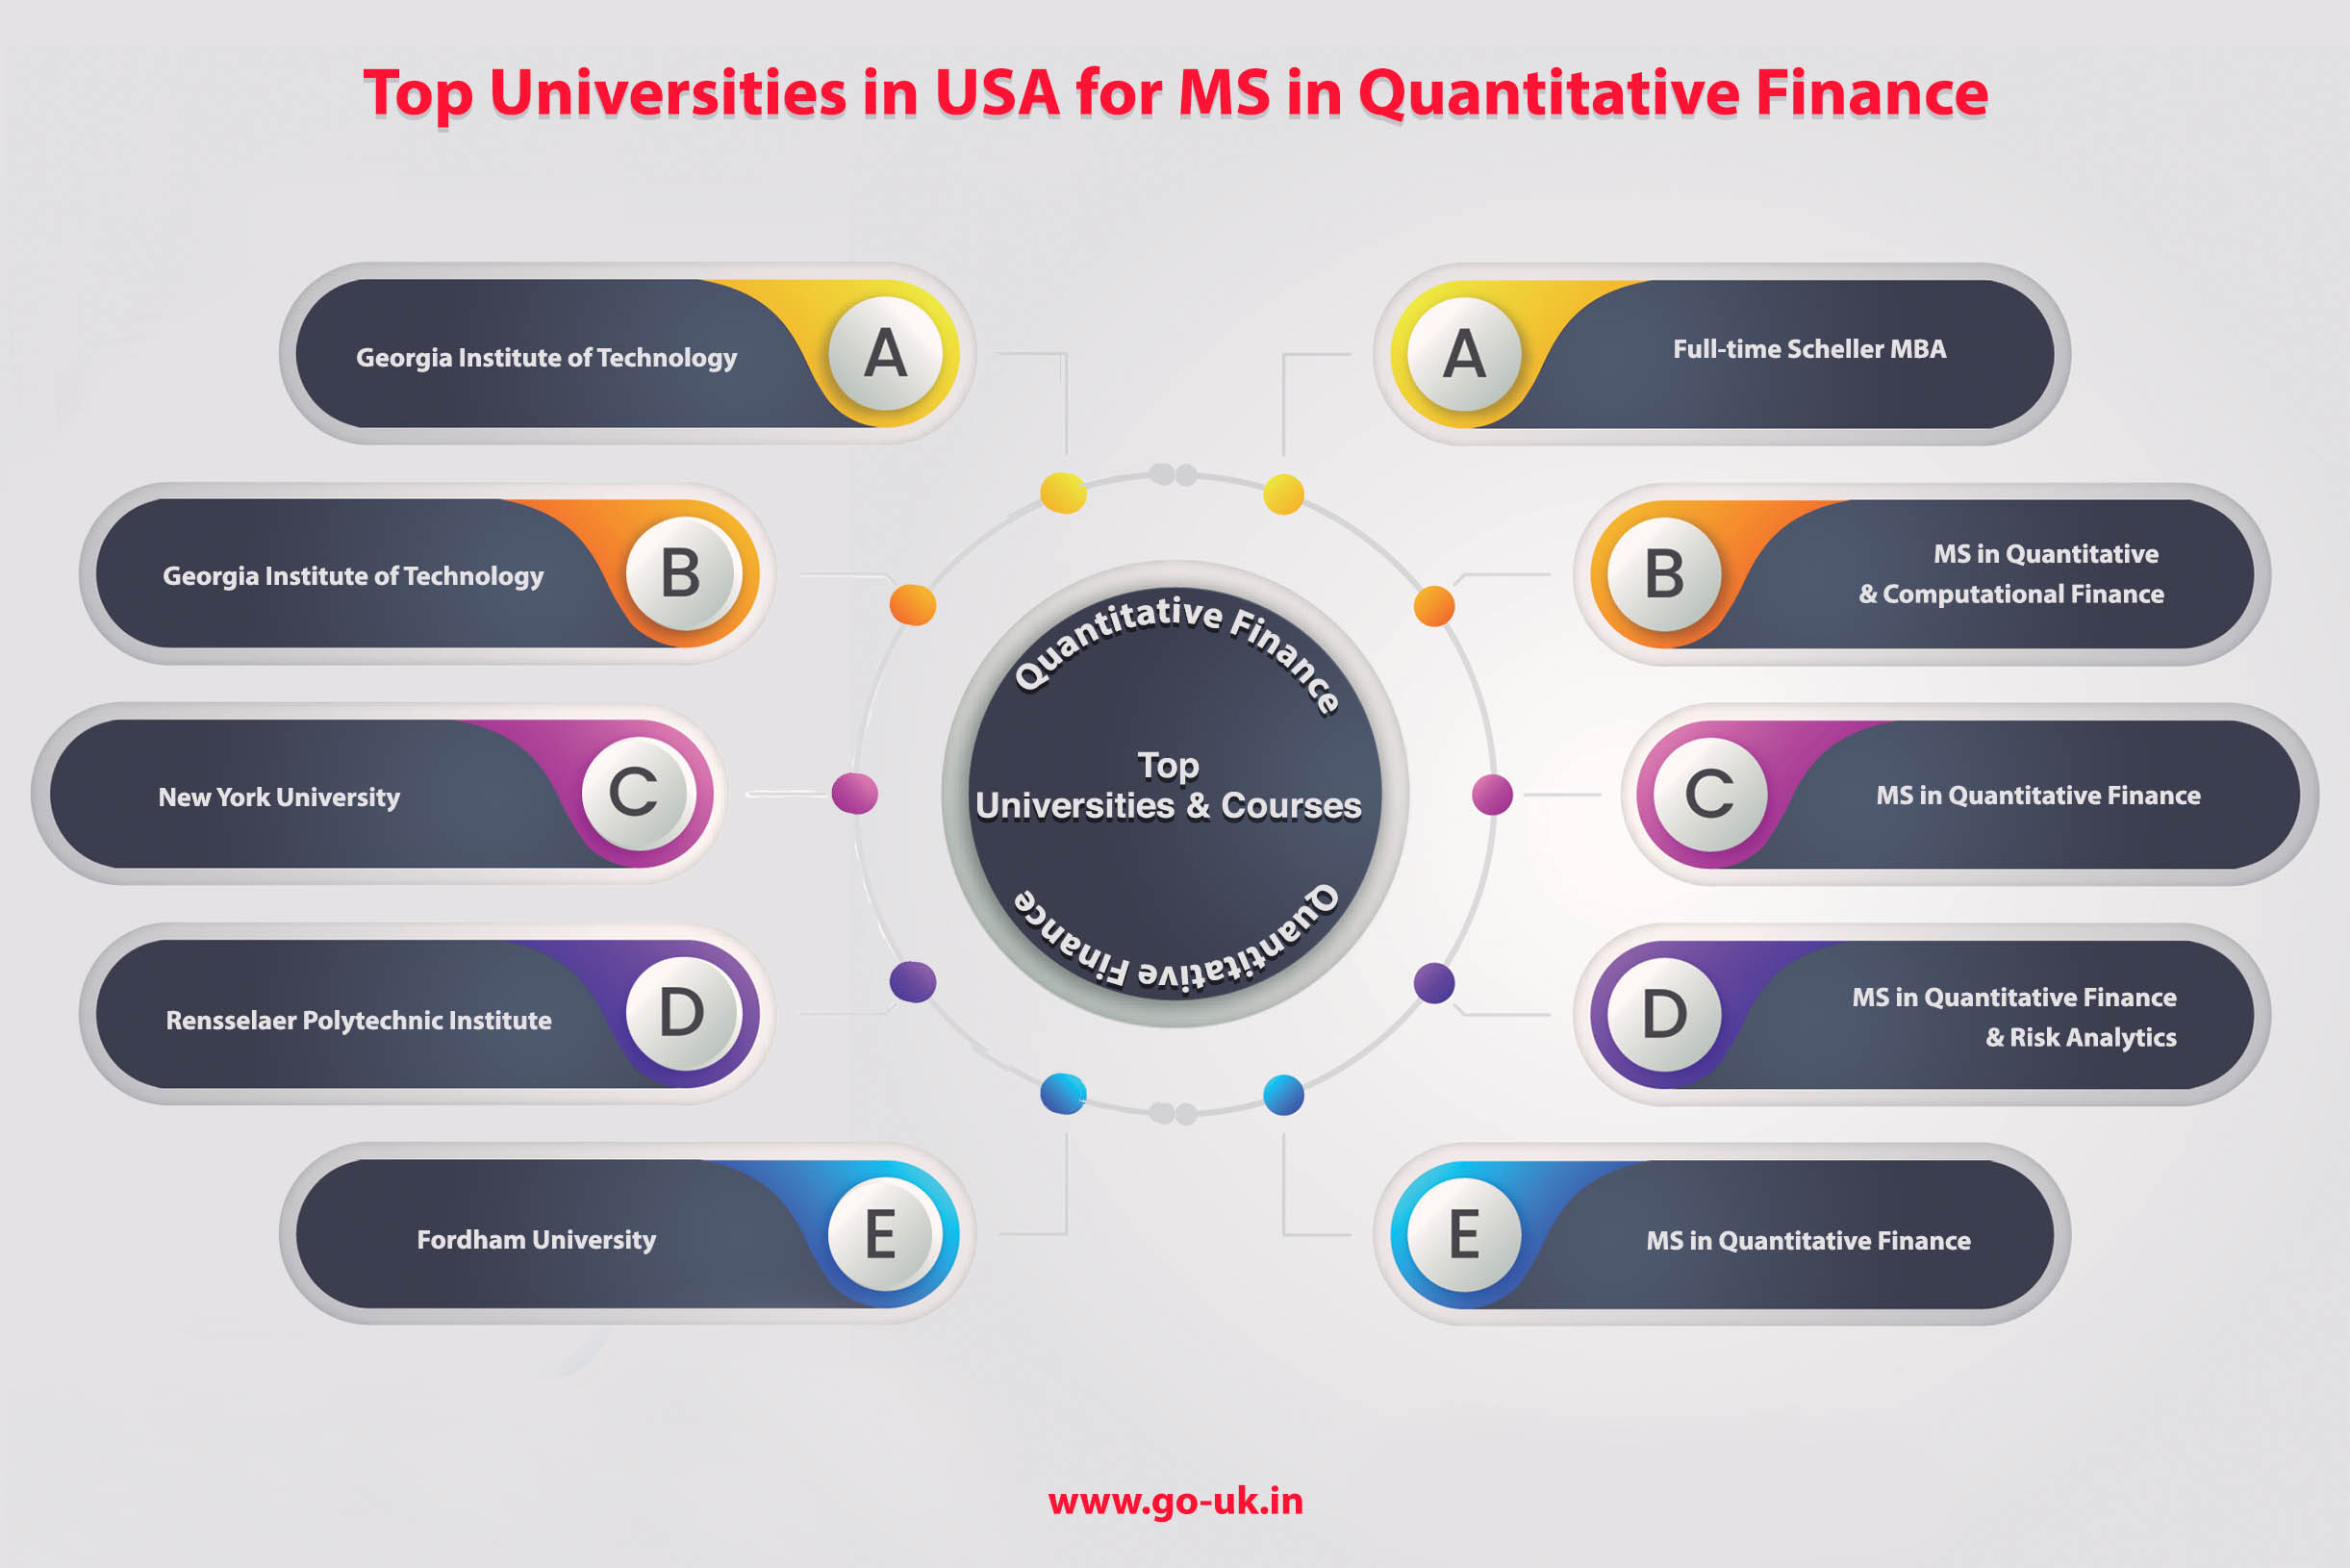 Top Universities in USA for MS in Quantitative Finance